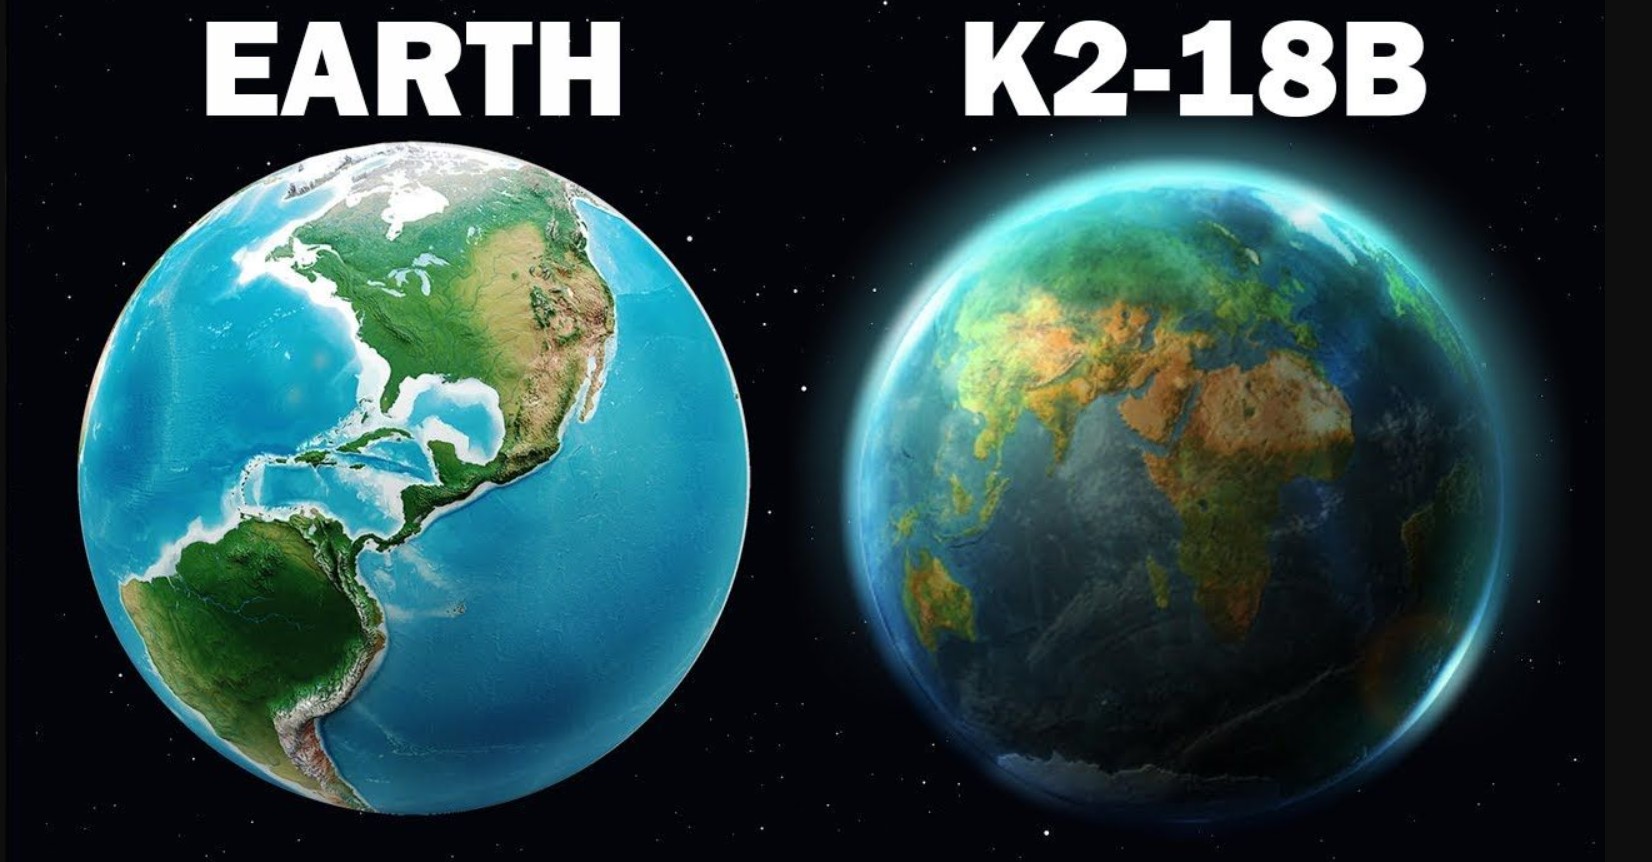 Life Clues on K2-18 b? Hydrogen-Rich Atmosphere and Possible Oceans - GK Now thumbnail